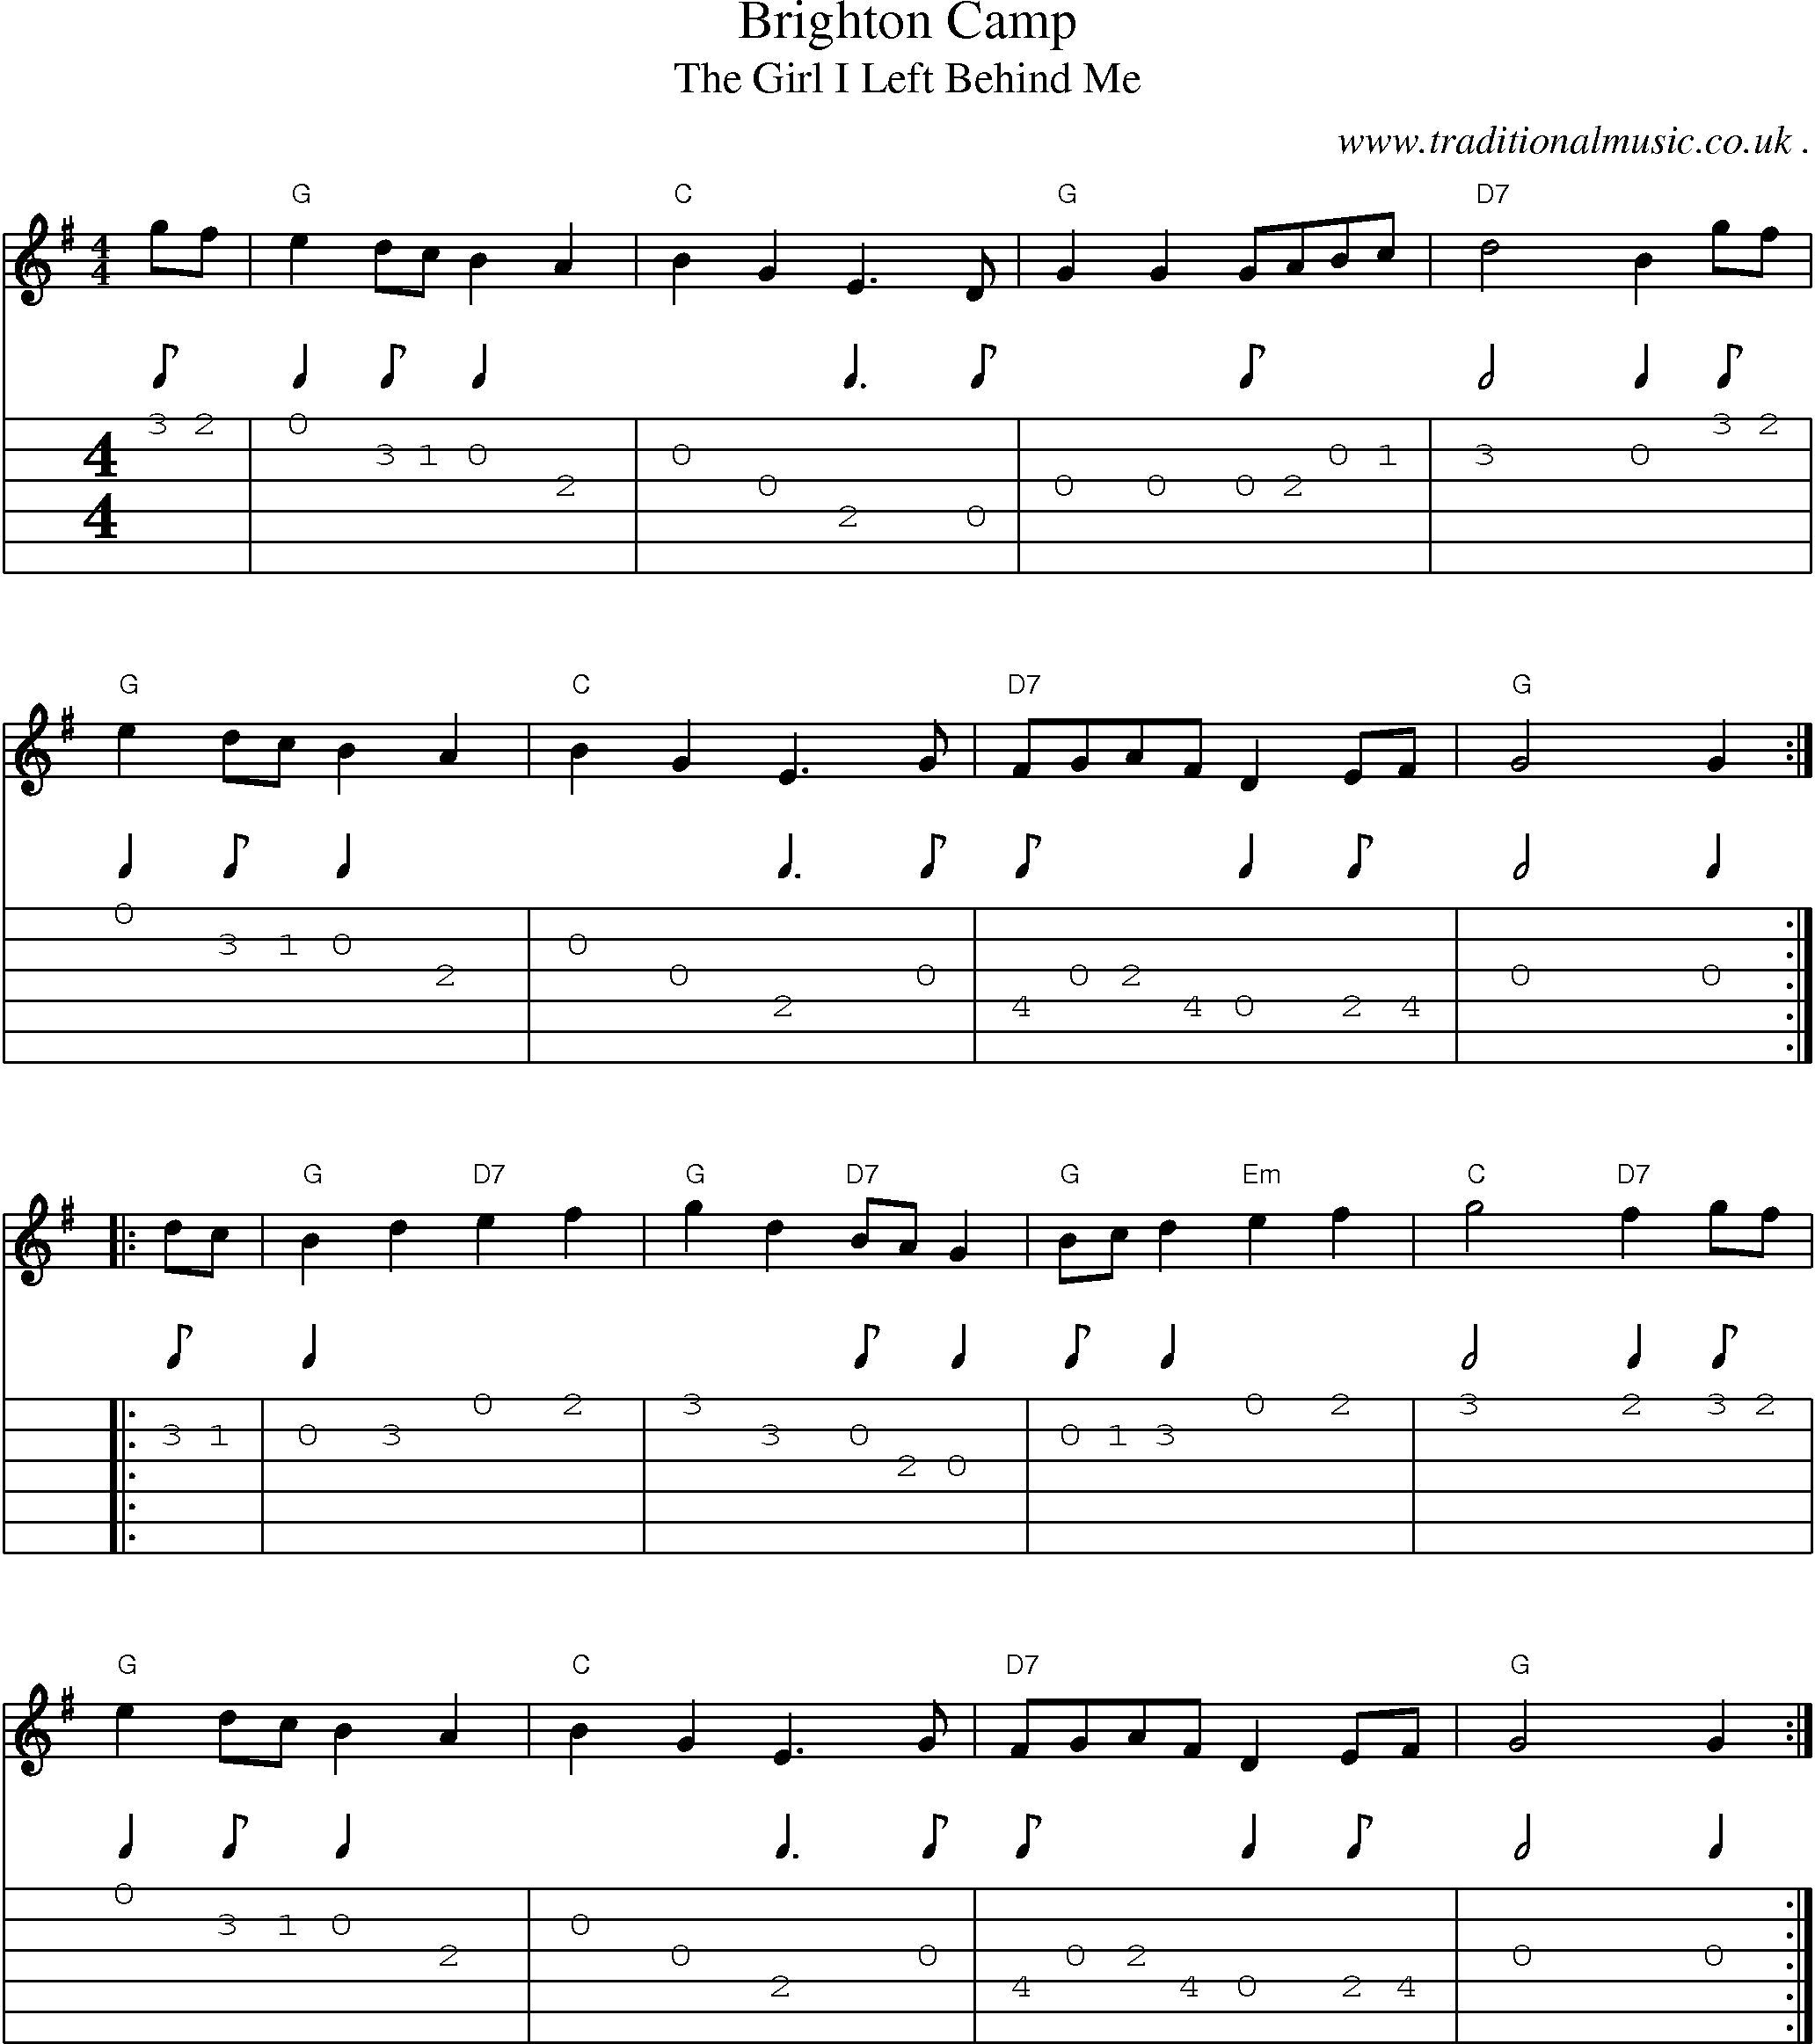 Music Score and Guitar Tabs for Brighton Camp